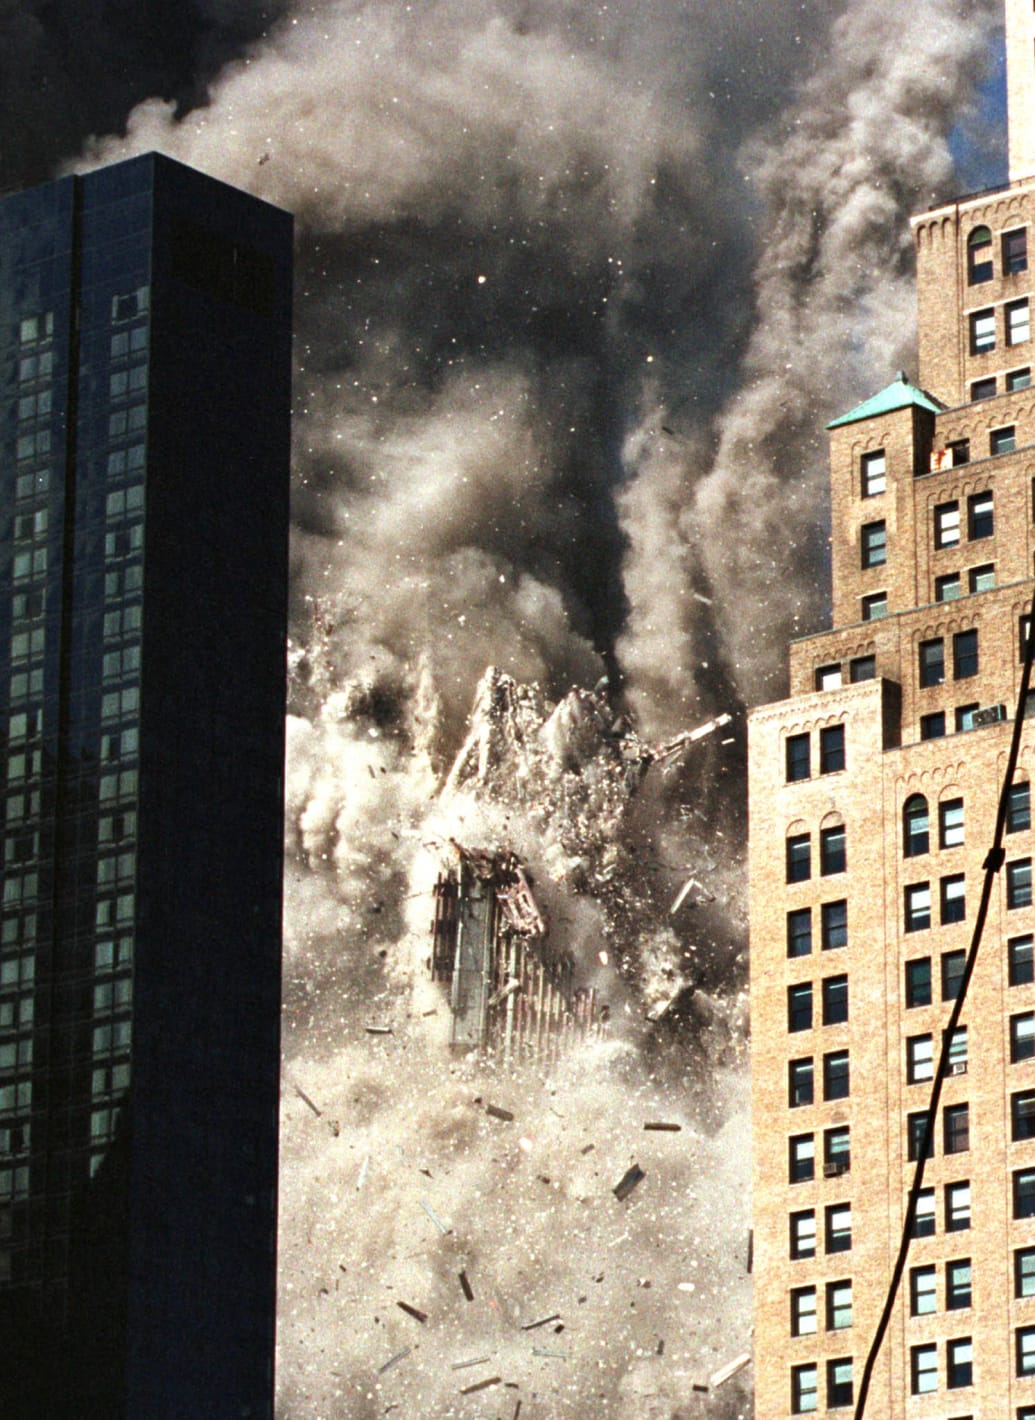 A photo Petra Beter took of one of the towers of the World Trade Center collapses after being struck by a hijacked commercial airplane on Sept. 11, 2001.